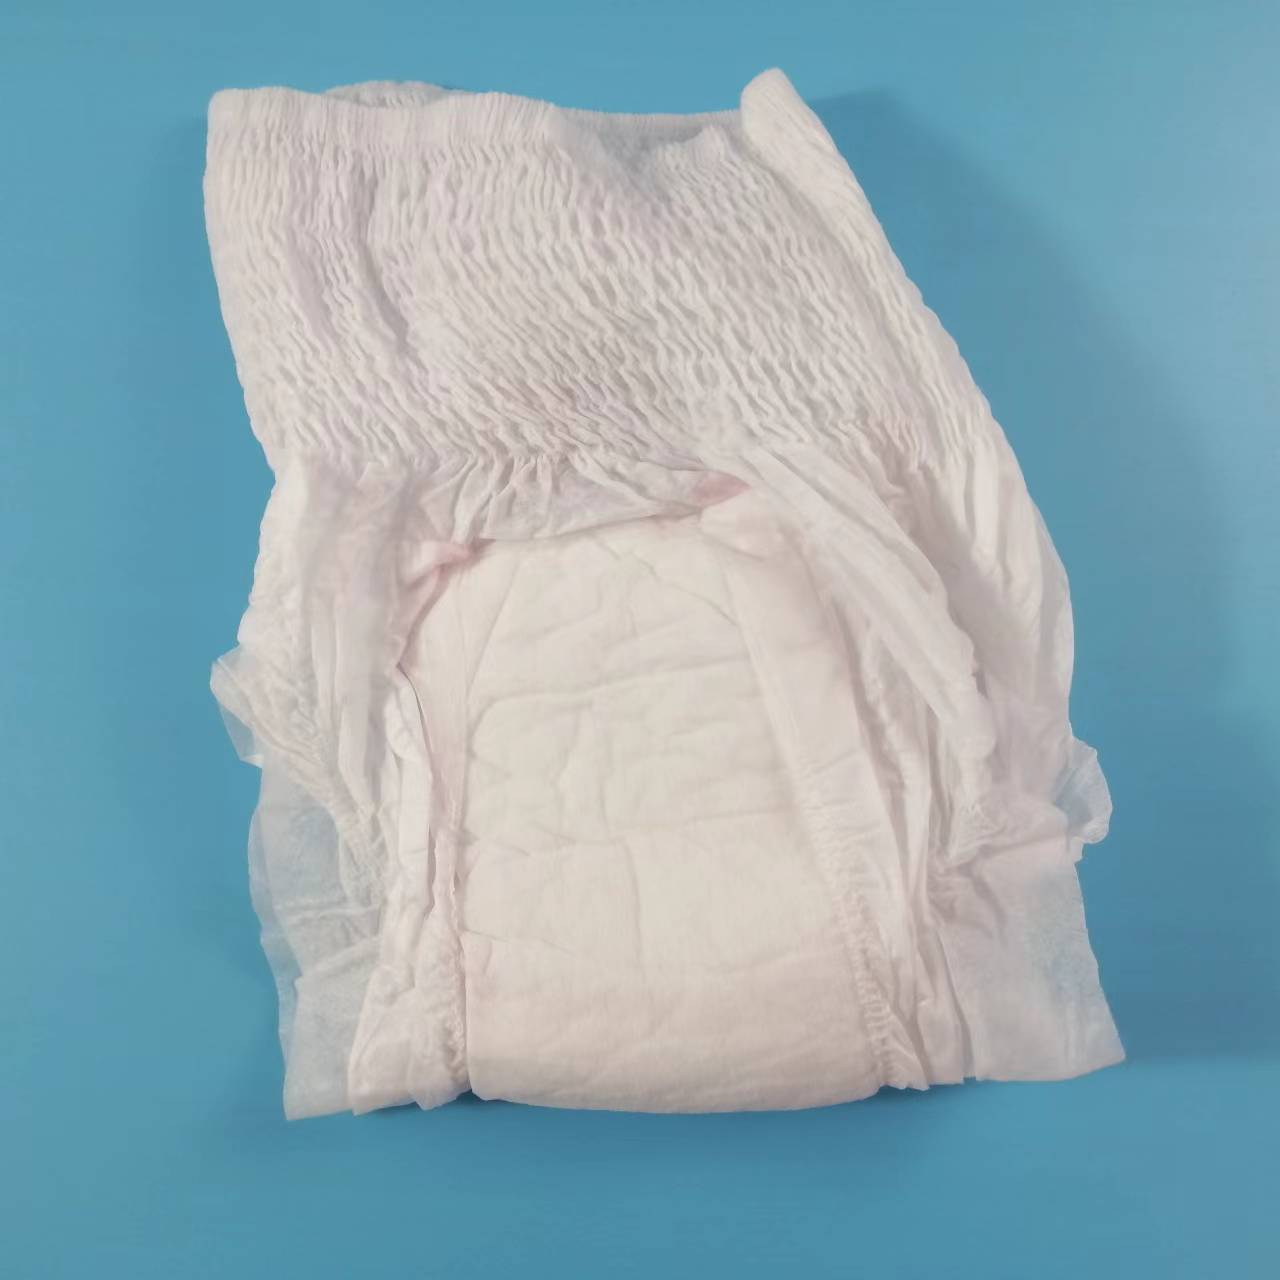 Disposable Incontinence Bed Pads,Leak-Proof Breathable Disposable Underpads  for Adults, Children and Pets,Hospital 1500ml High Absorbency Disposable